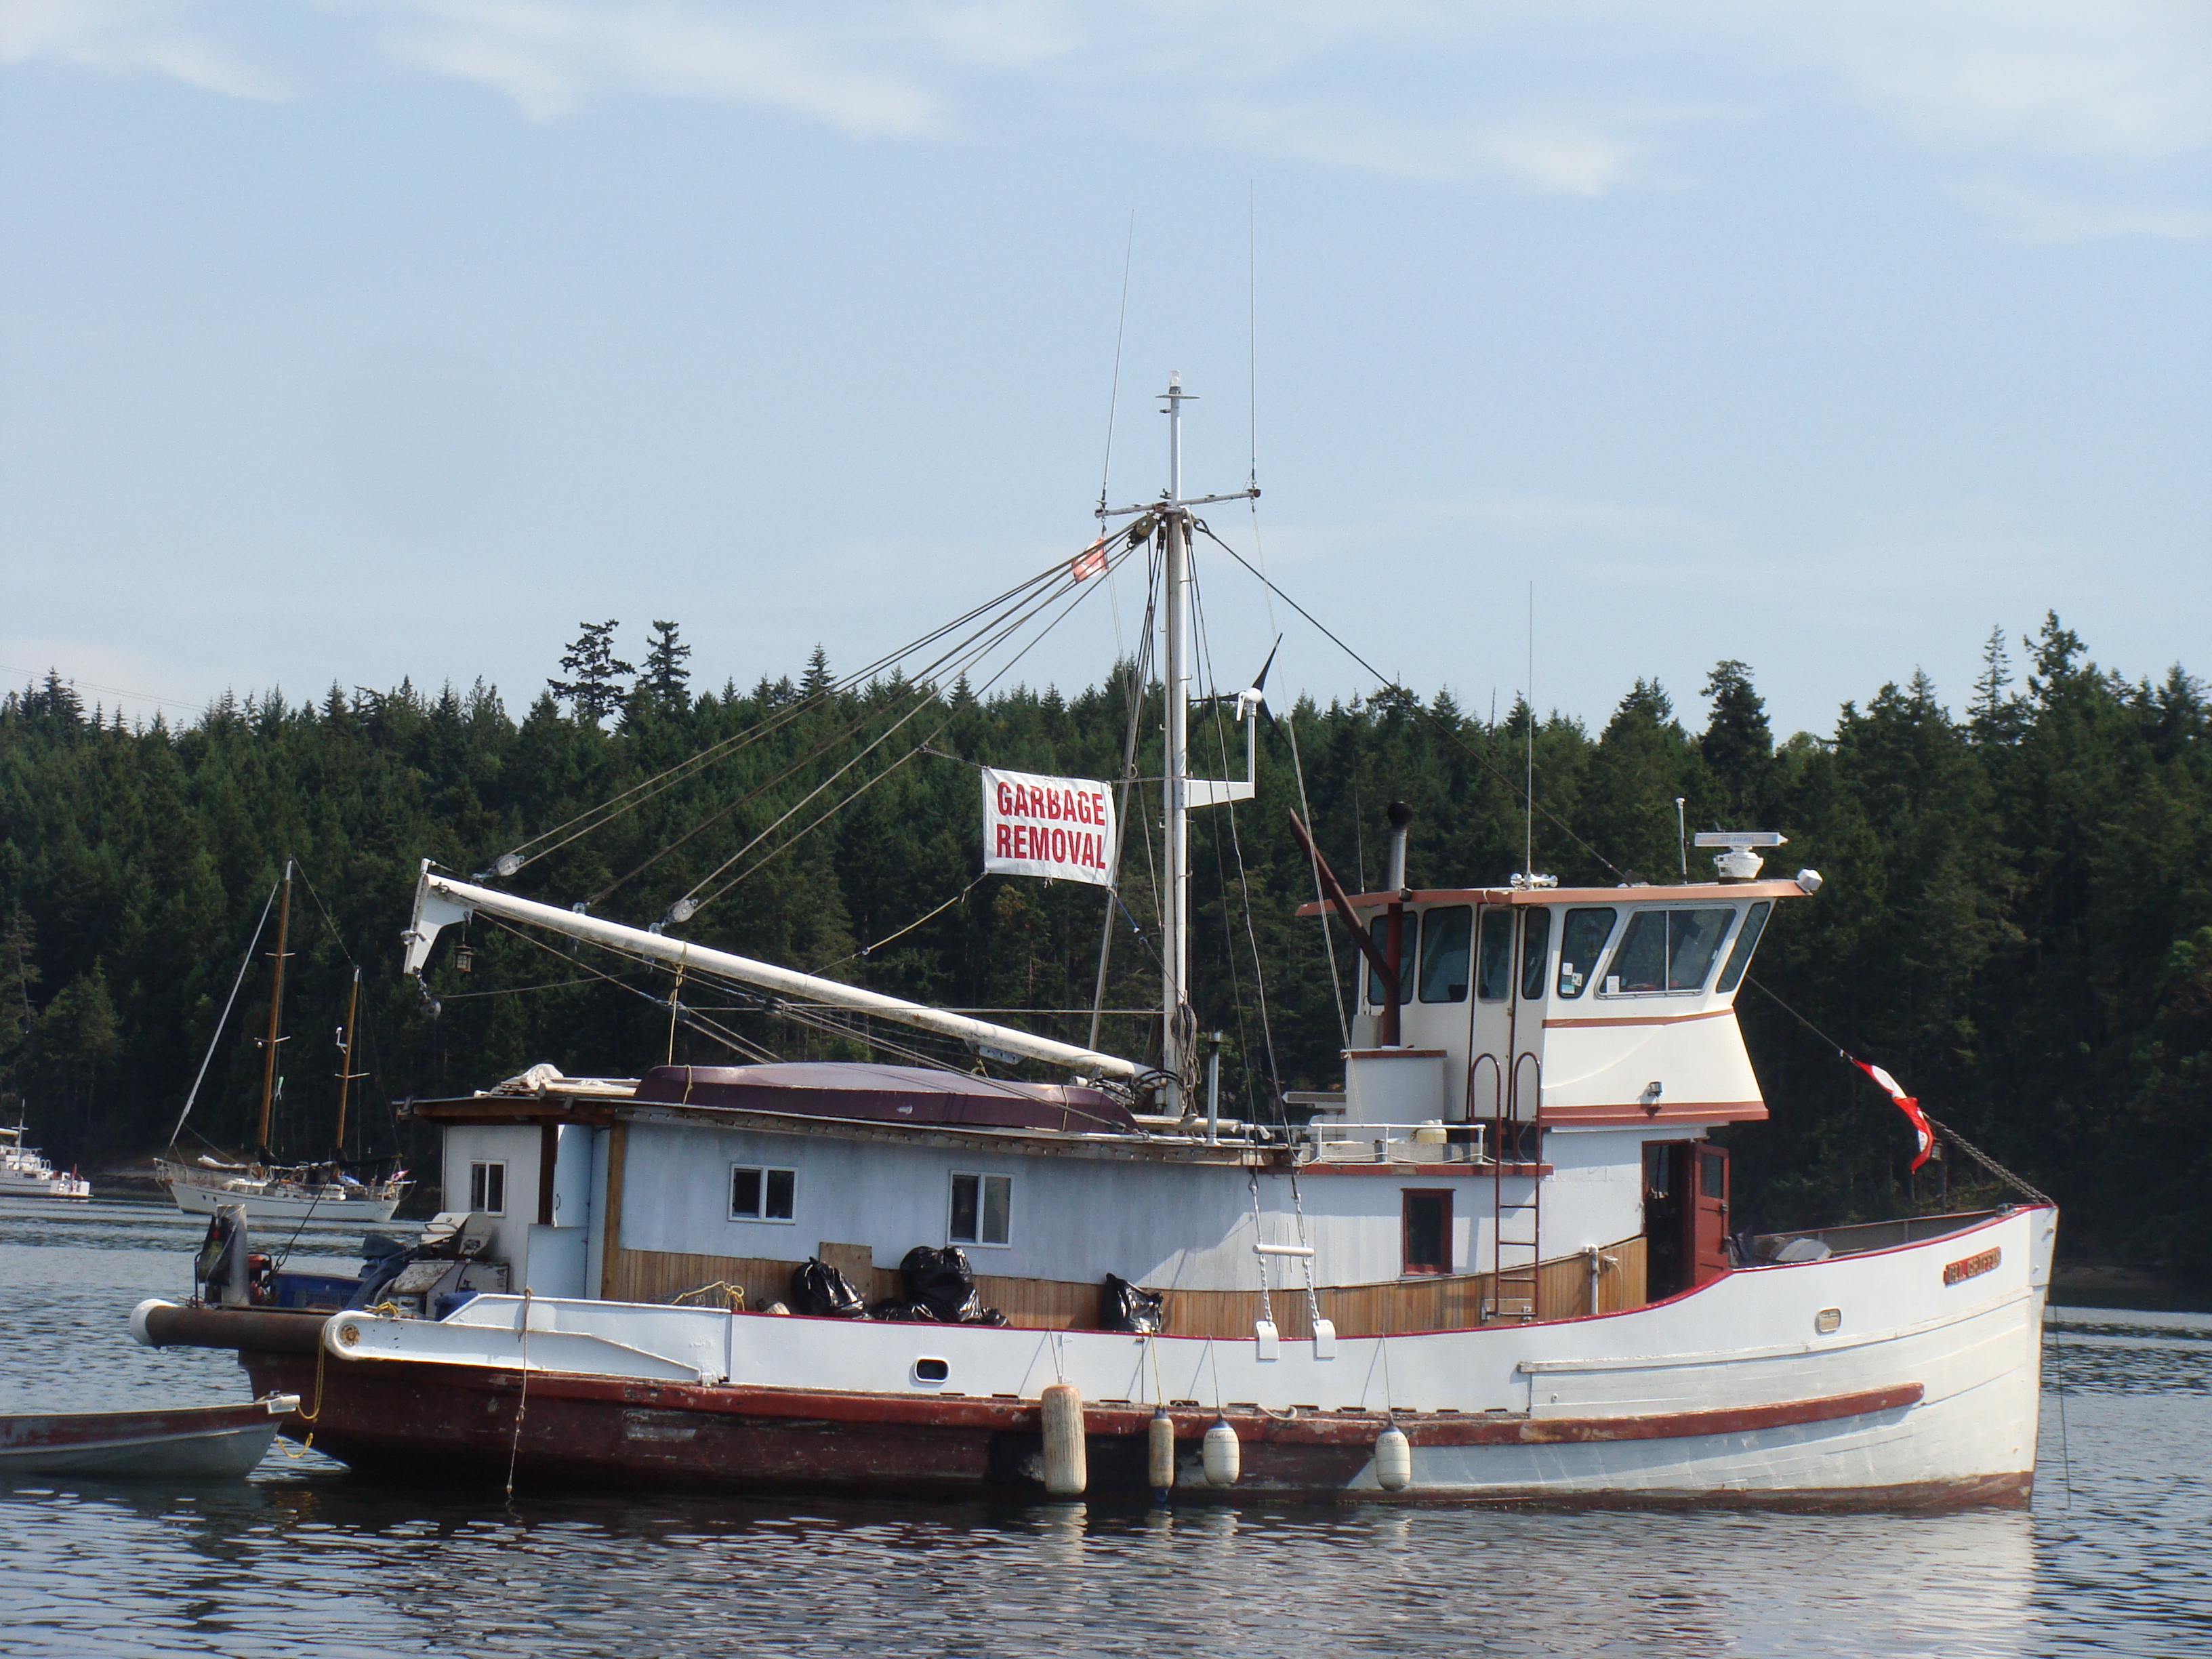 Old commercial fishing boat reportedly sinks in Maple Bay - My